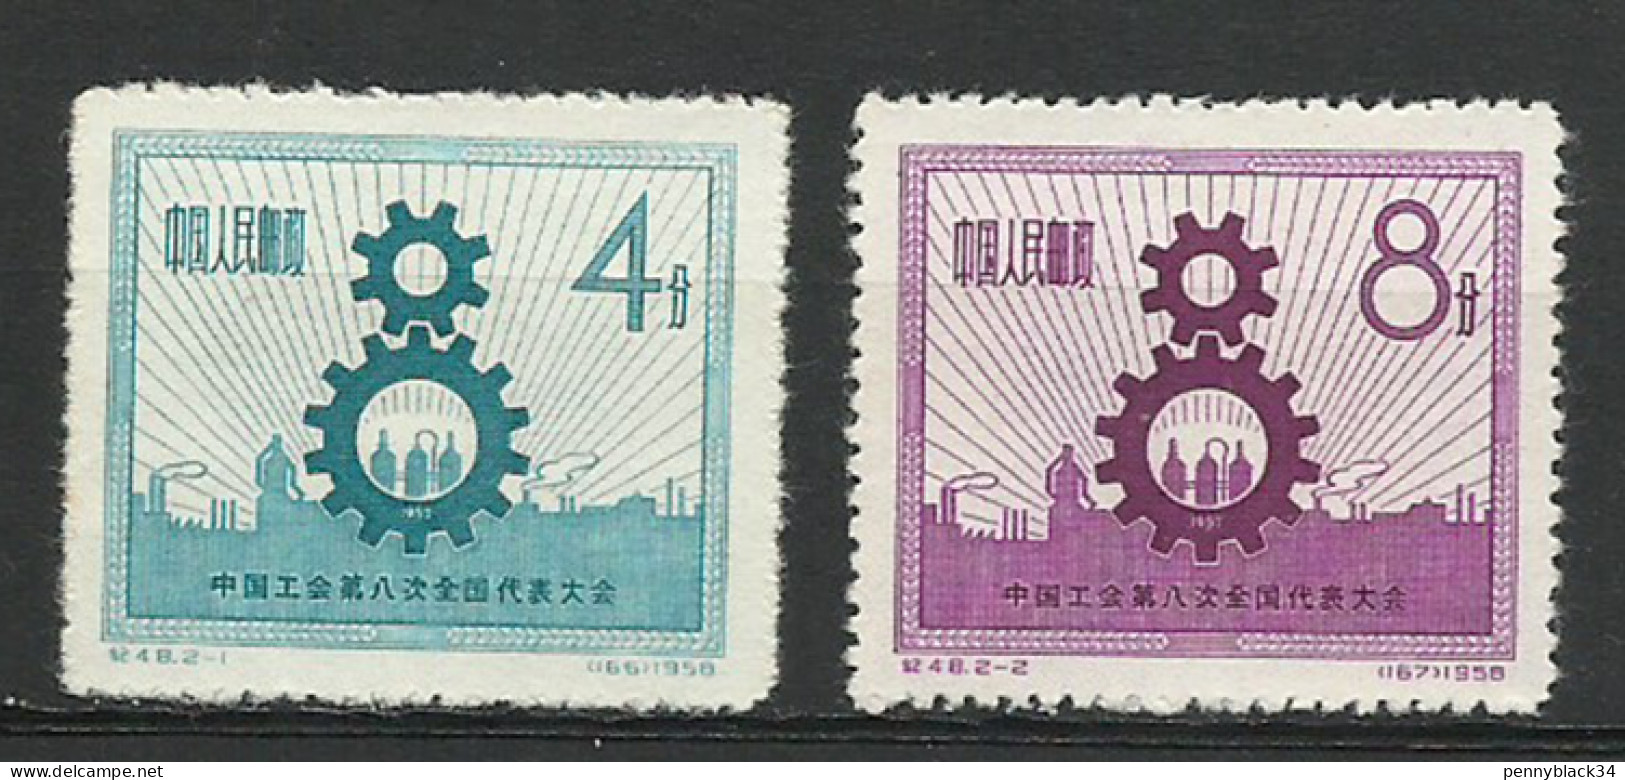 Chine China 1958 Yvert 1133/1134 ** Congrès Des Syndicats - 8th National Congress Of Chinese Trade Union Ref C48 - Neufs